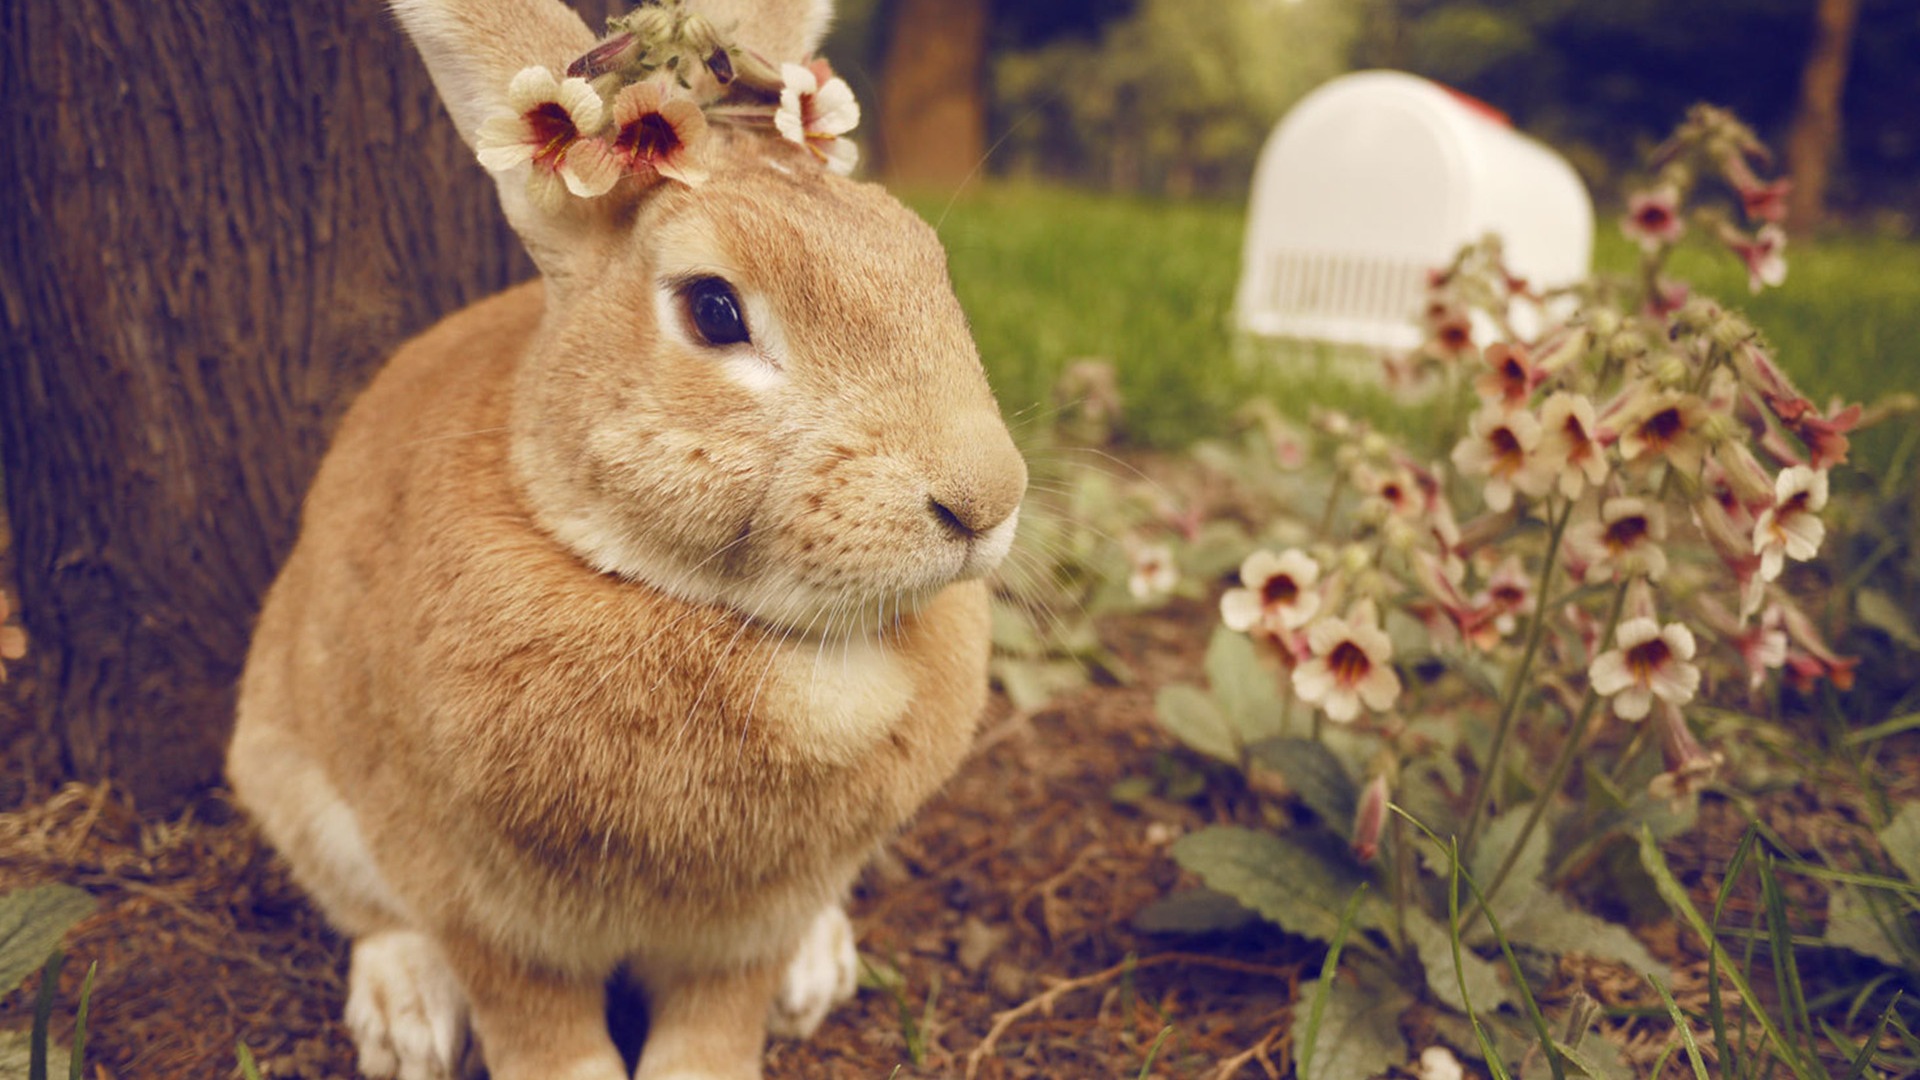 Furry animals, cute bunny HD wallpapers #18 - 1920x1080